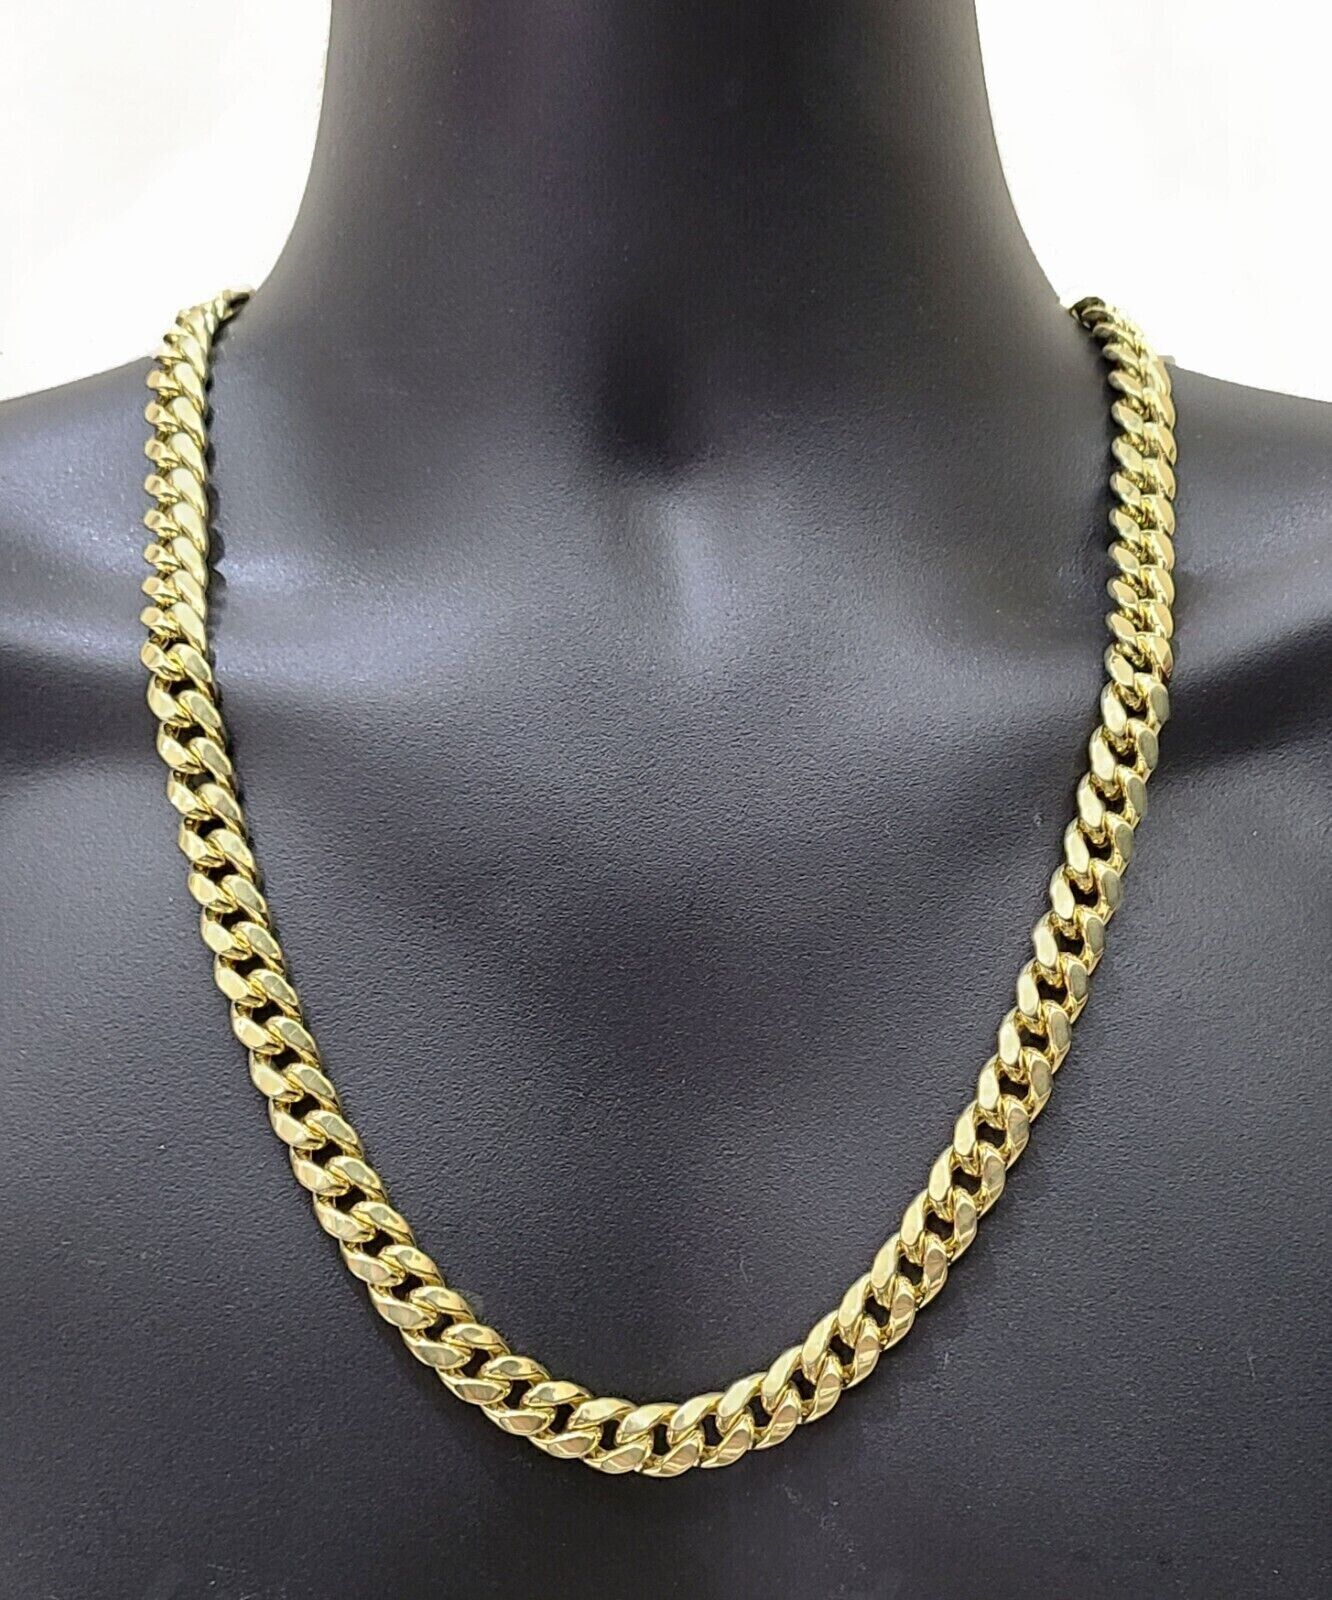 Real 14k Gold Chain 24 Inch Miami Cuban Link Necklace 9mm Strong Mens 14KT Gold